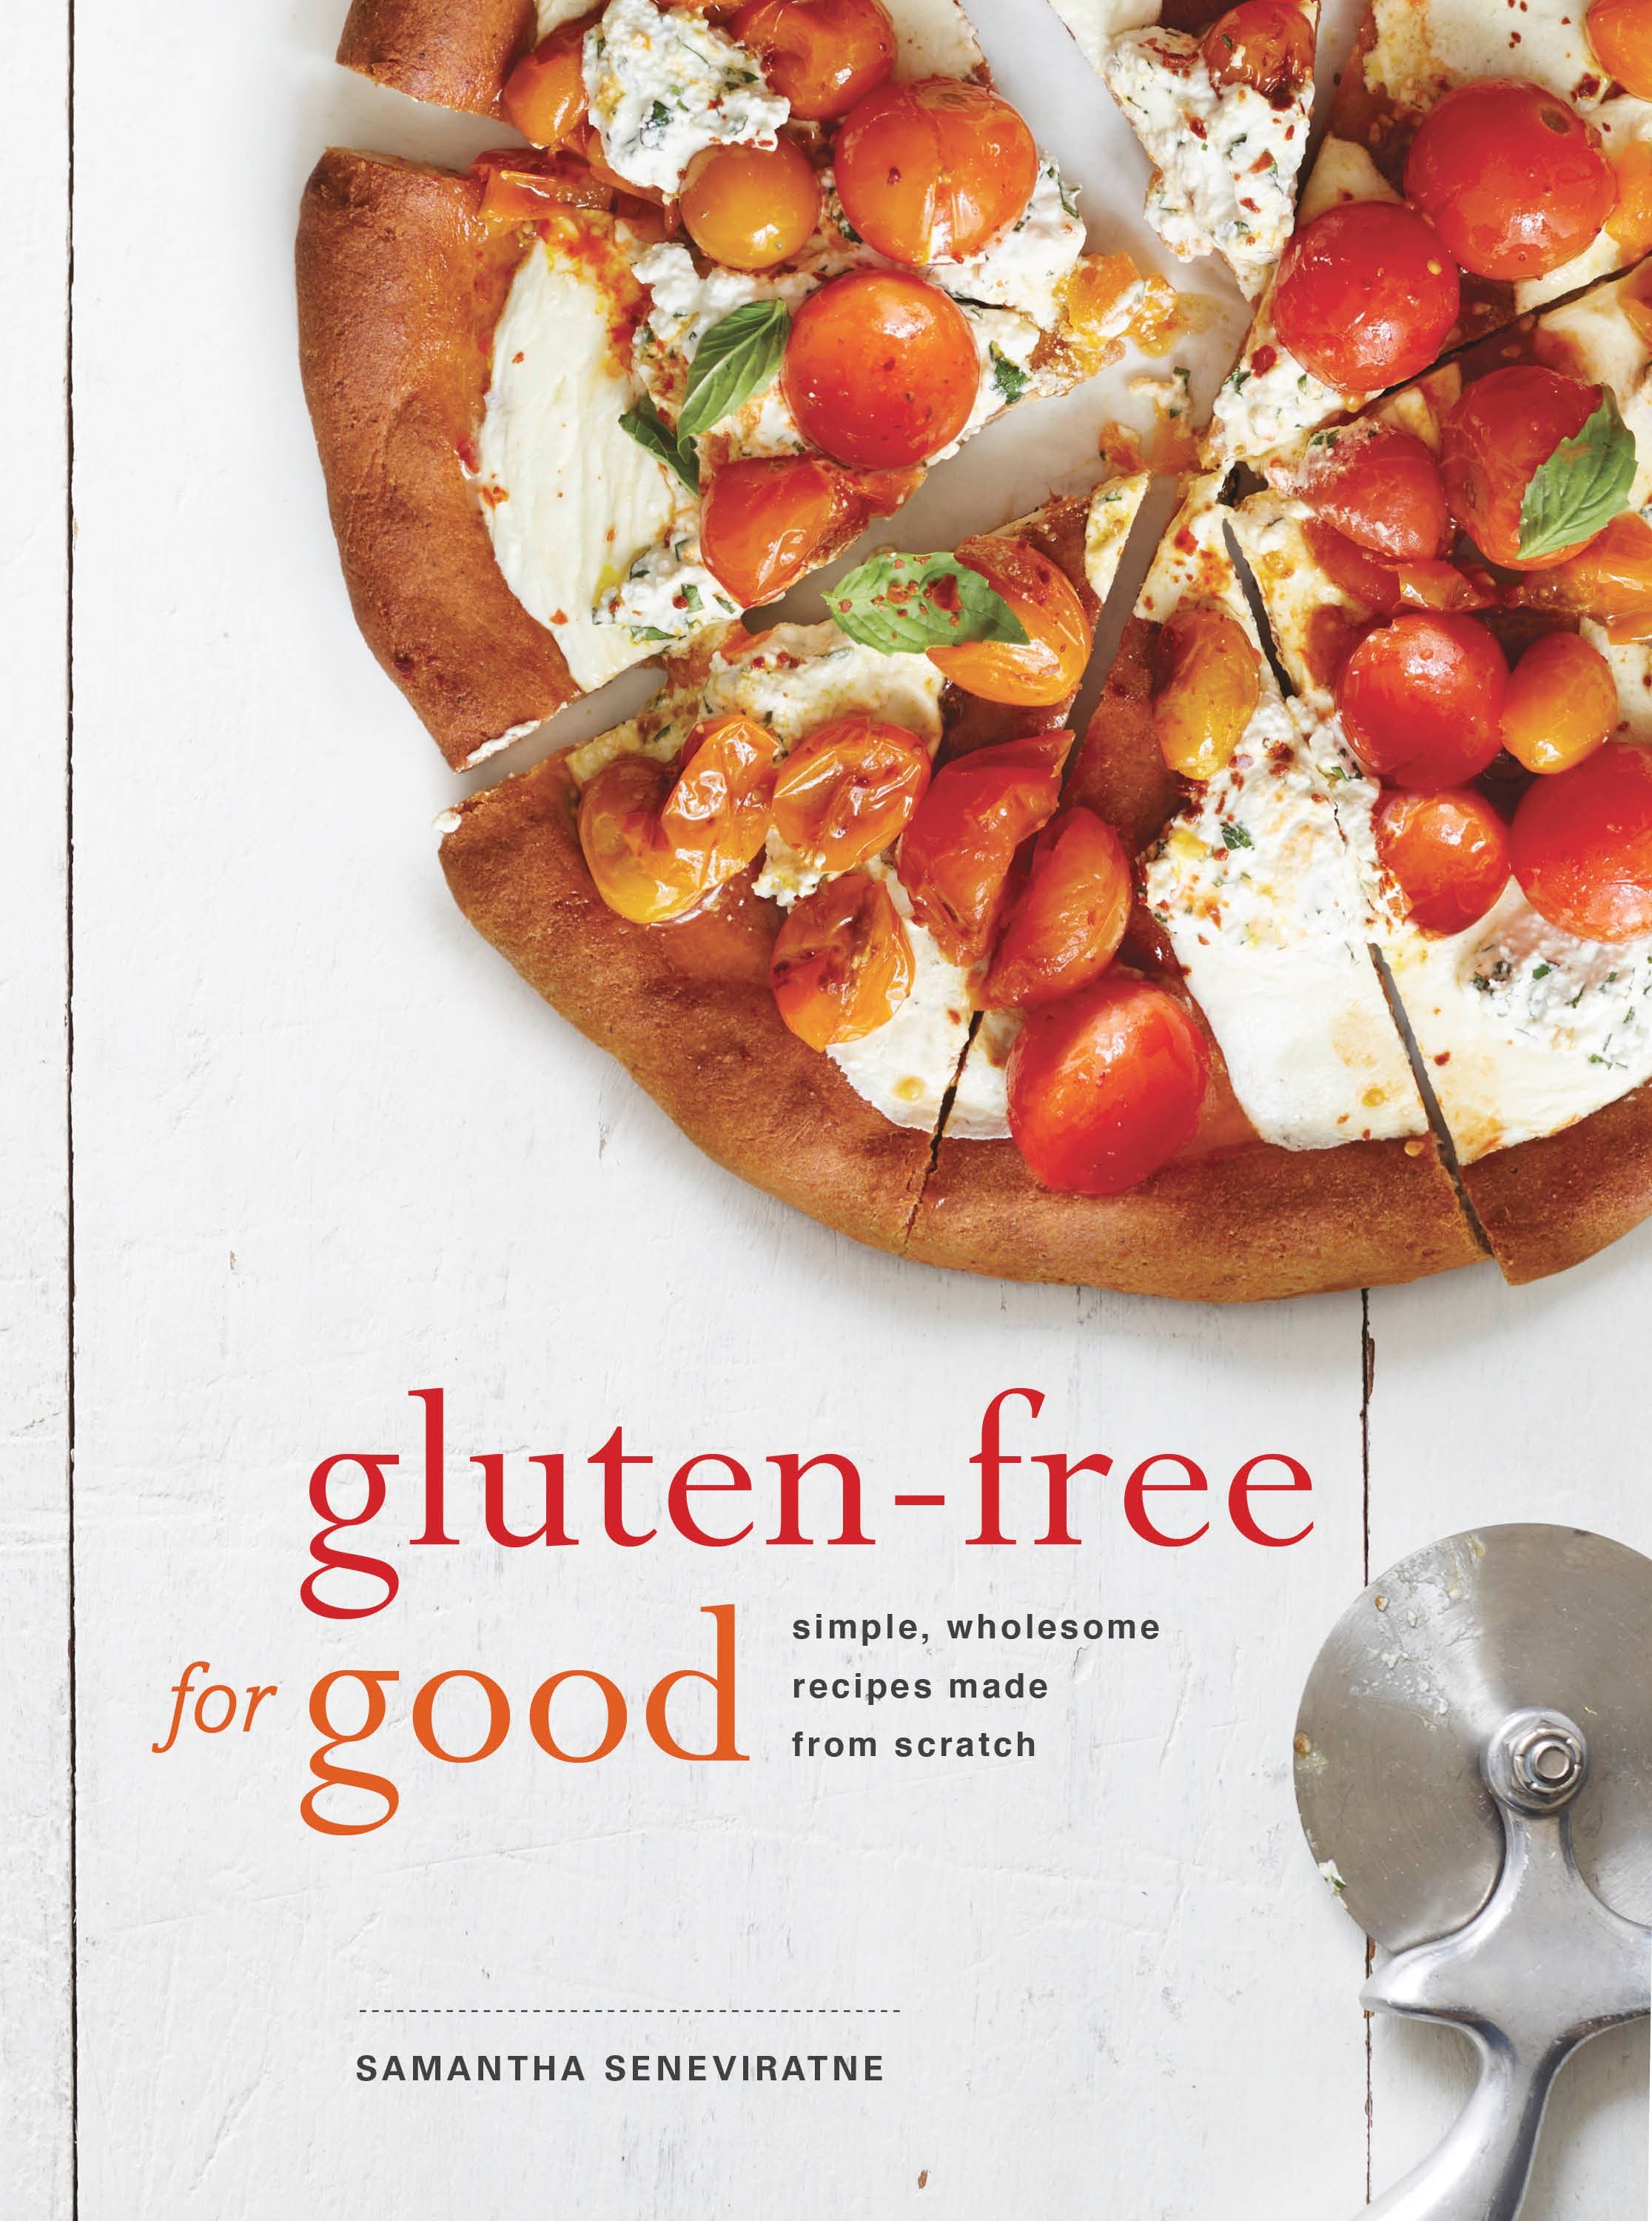 Gluten-free for good simple, wholesome recipes made from scratch cover image